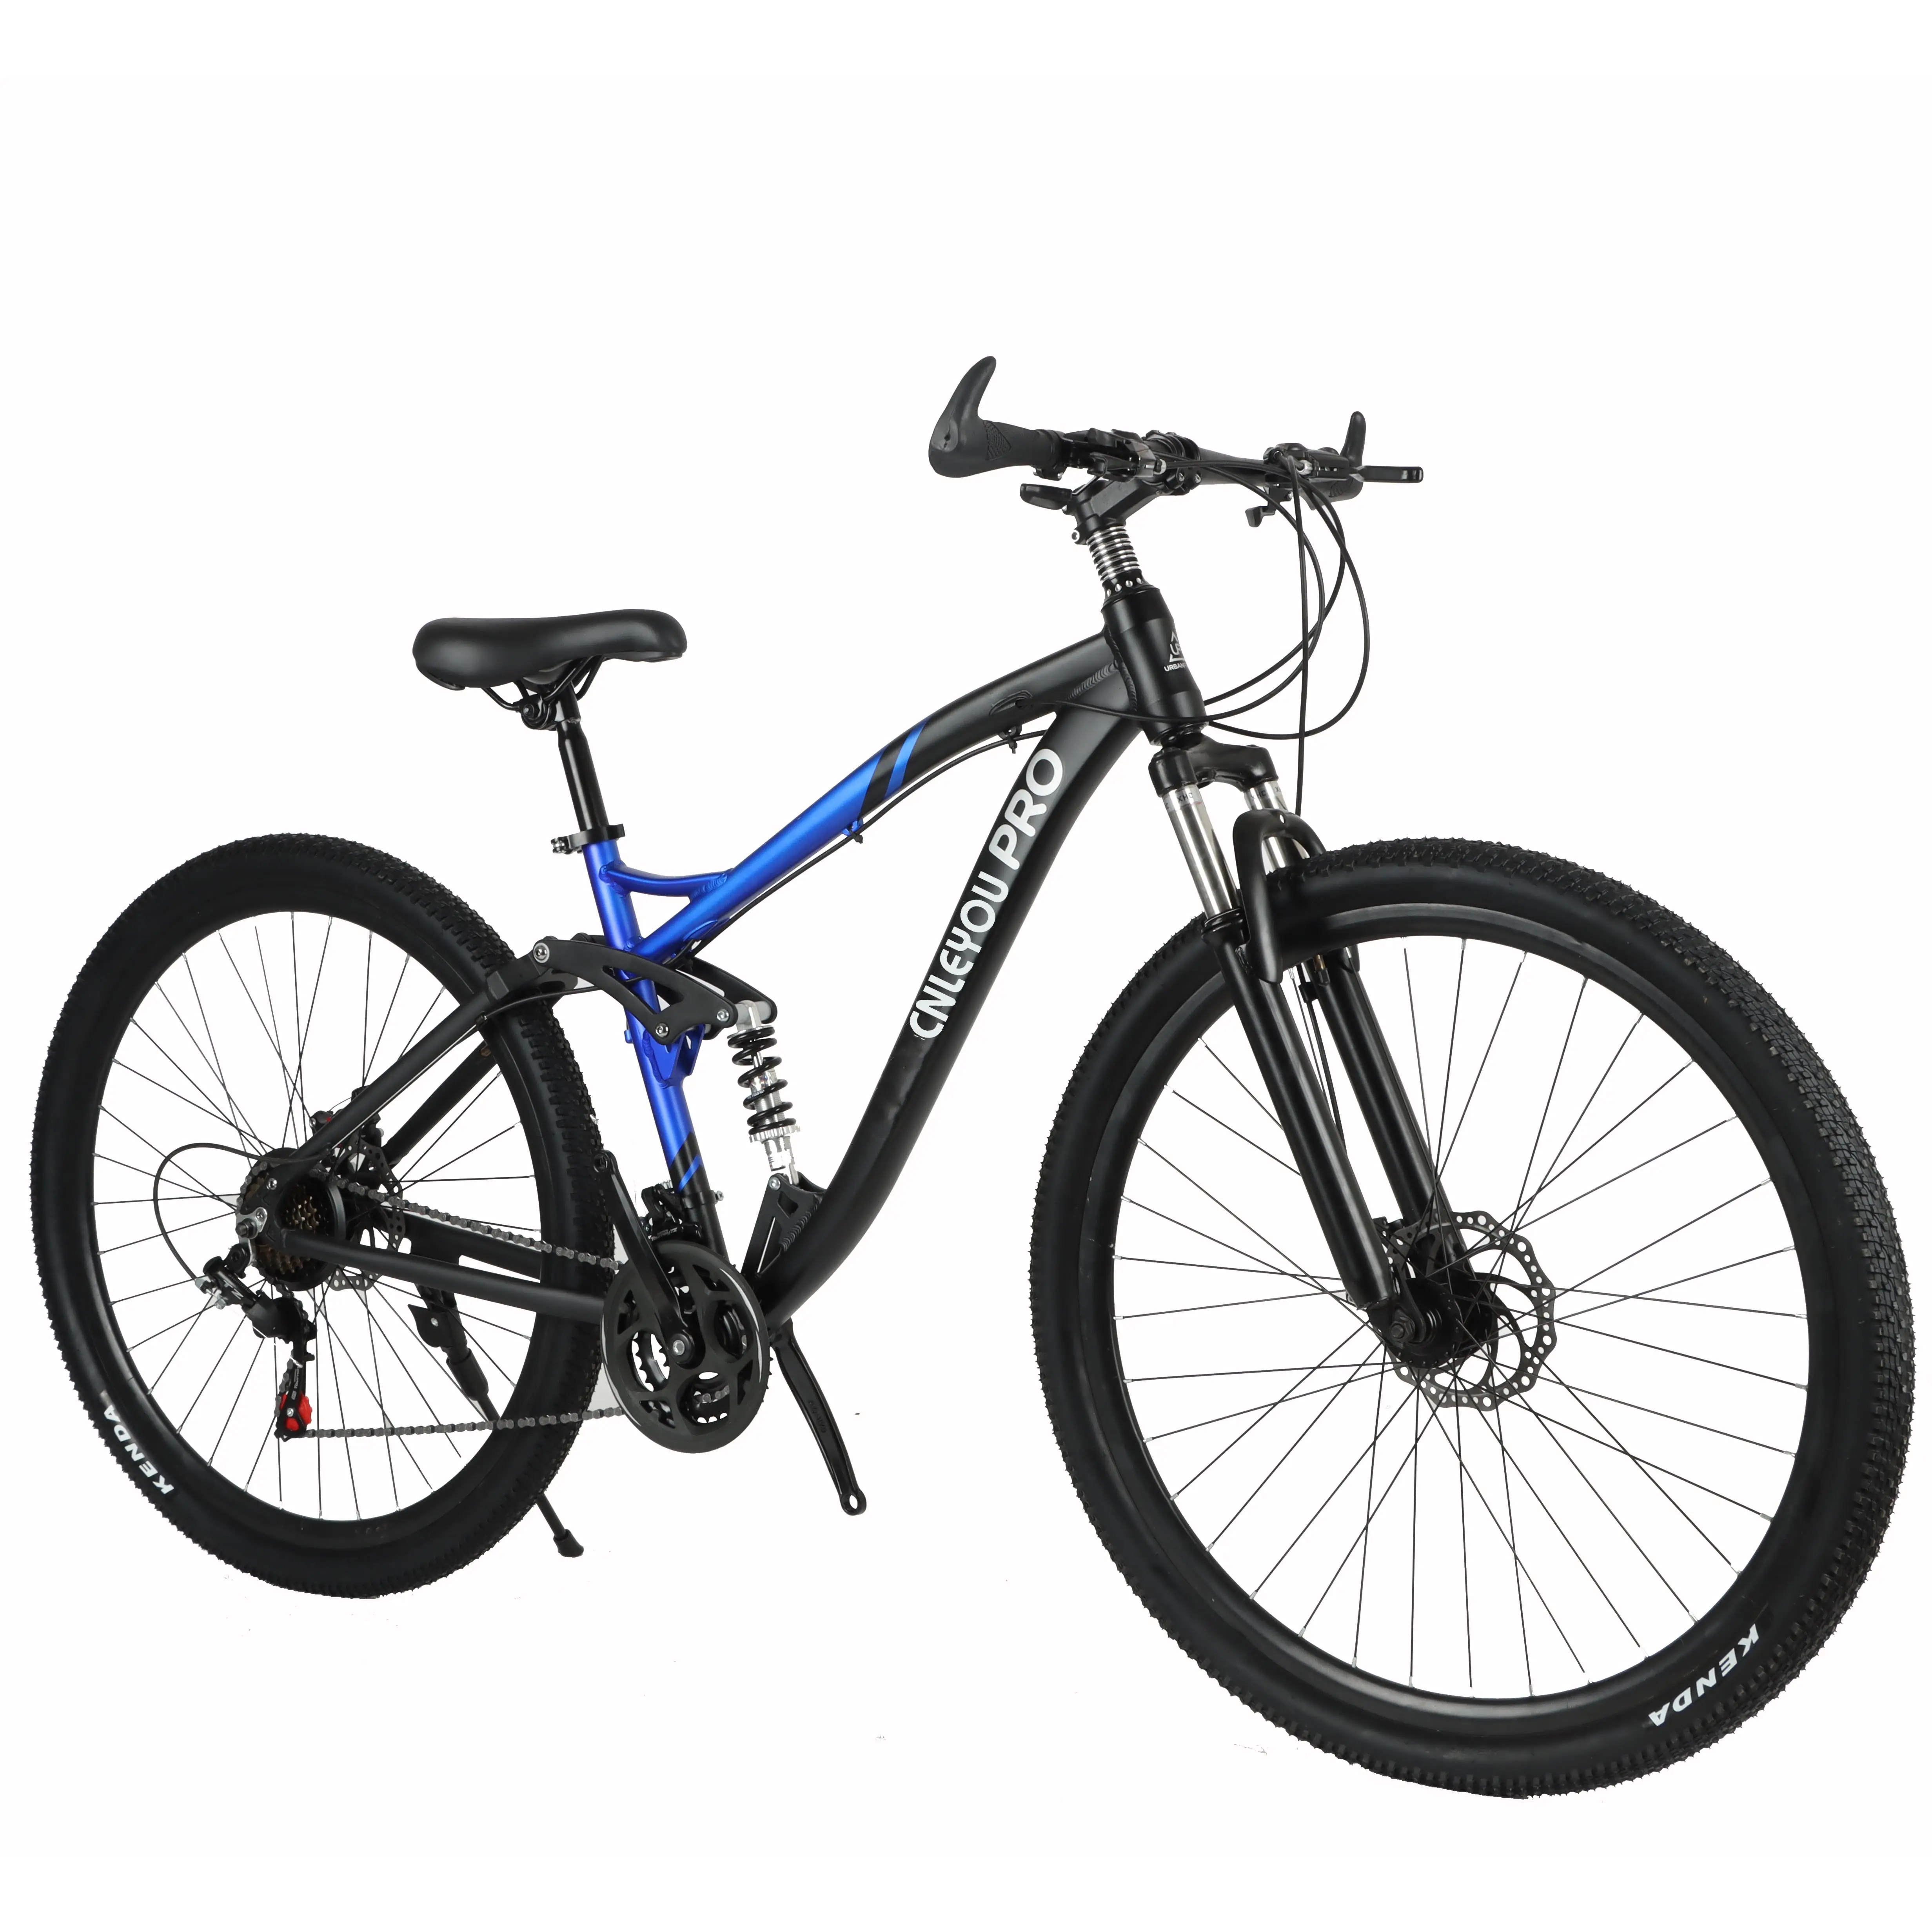 Bicicleta Bike New Item 29er Bicycles For Adults / 27.5" MTB Mountain Bicycle / Bicicleta 29 Mountain Bike